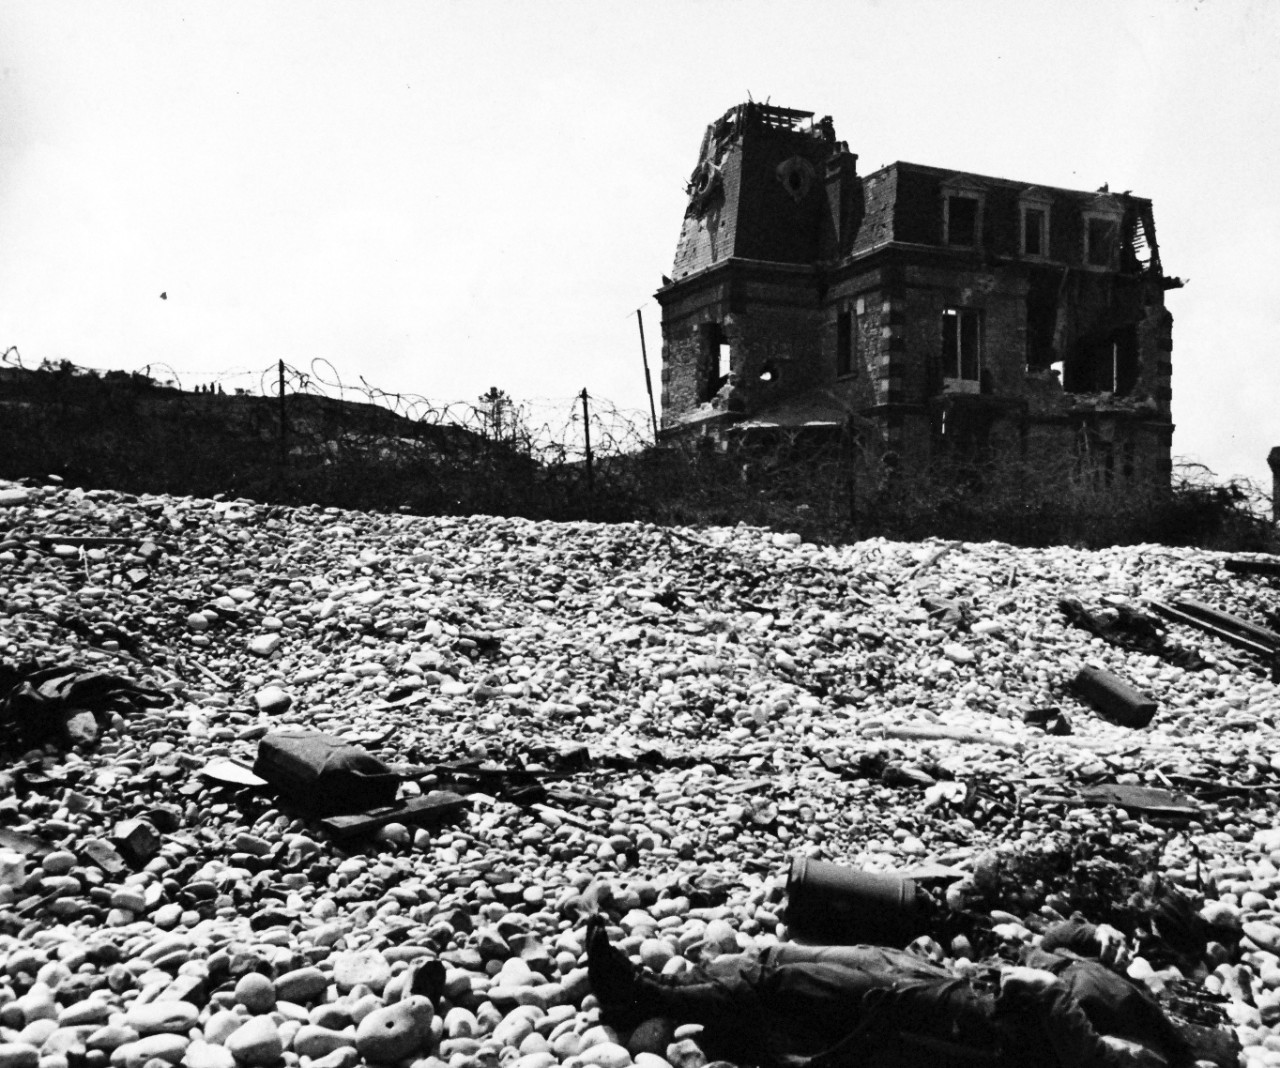 80-G-45719:   Normandy Invasion, June 1944.   French chateau on French invasion coast damaged by naval gunfire on D-Day, 6 June 1944.   Photograph released 12 June 1944.  Official U.S. Navy Photograph, now in the collections of the National Archives.  (2014/9/9).  